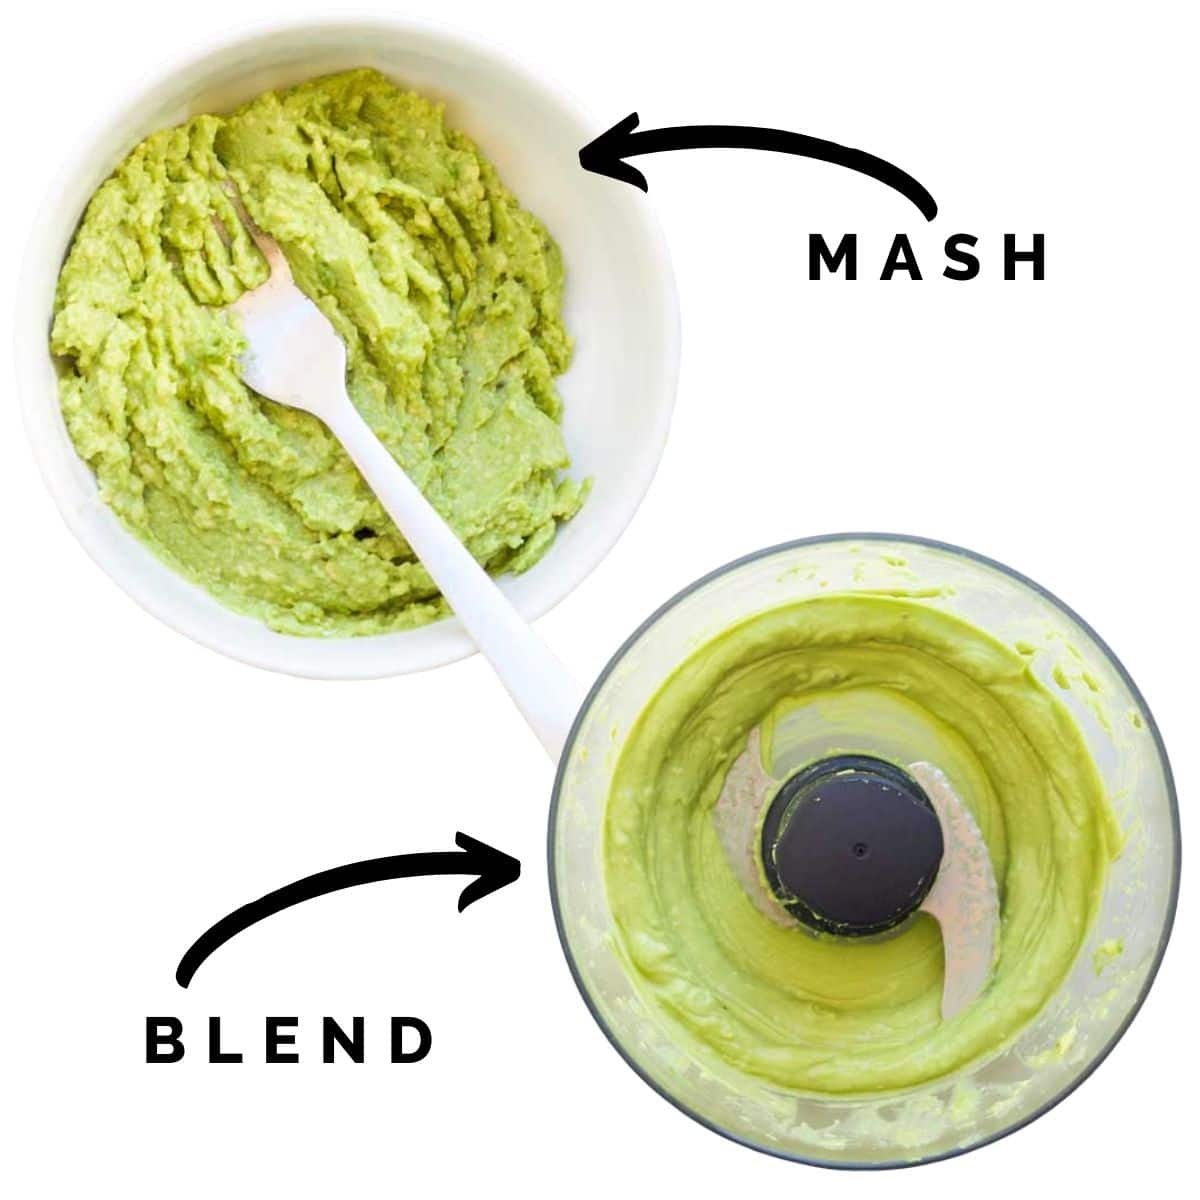 Avocado Puree Mashed in Bowl and Avocado Puree Blended in Food Processor